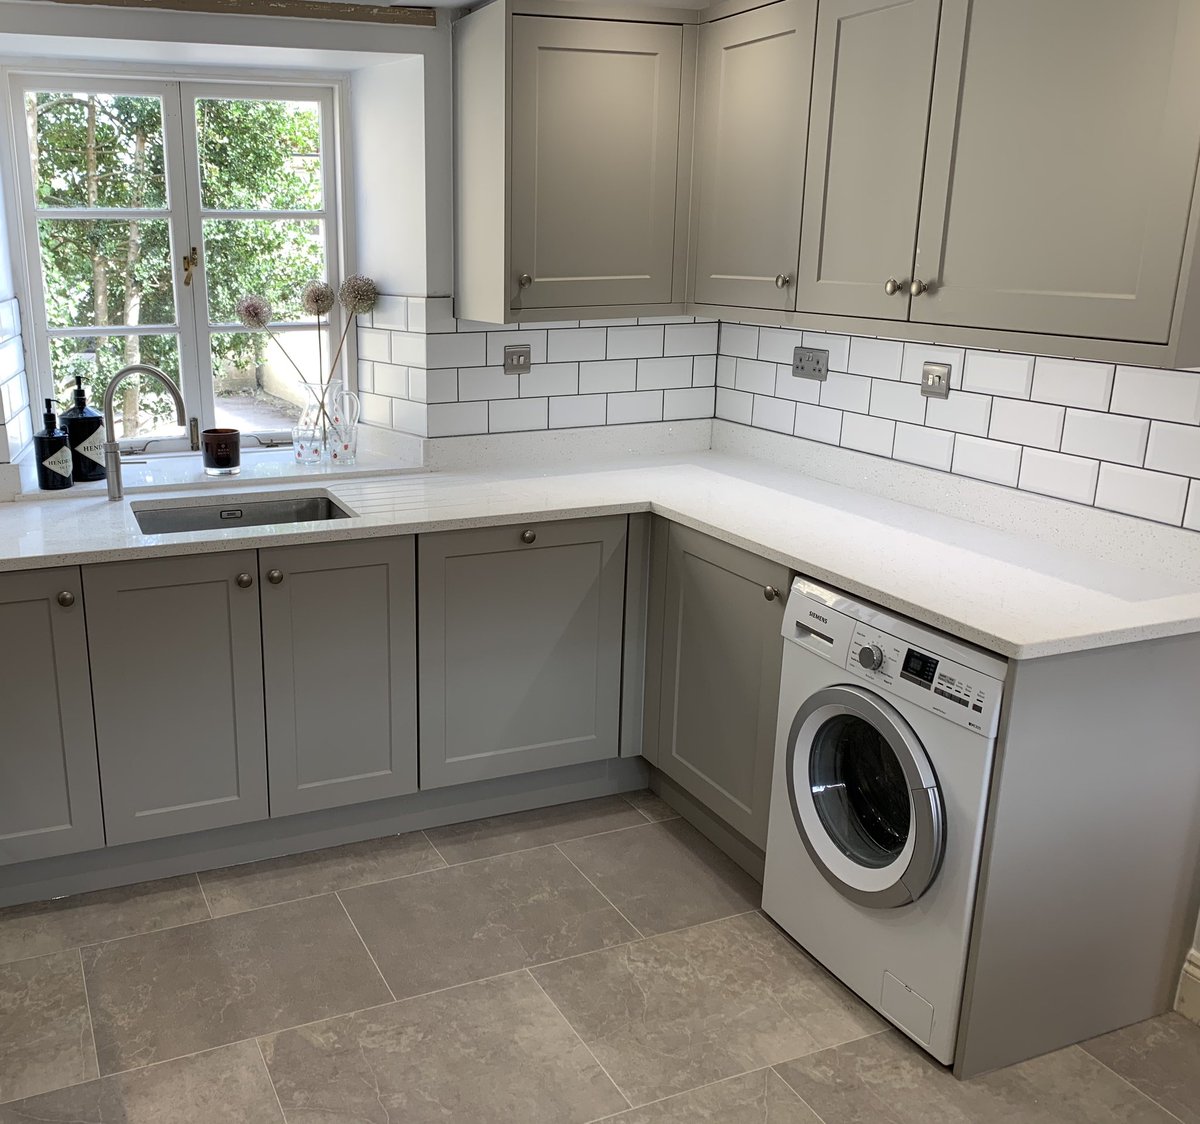 We are really pleased with how our latest kitchen installation has turned out. Products used include @FrankeUK @bybaUK @karndeanUK @blumuk @SamsungUK @RangemasterUK @BoschHomeUK @quookeruk @LandfordStone .
What do you think @kbbmagazine @kbbdaily @kbbreview ?